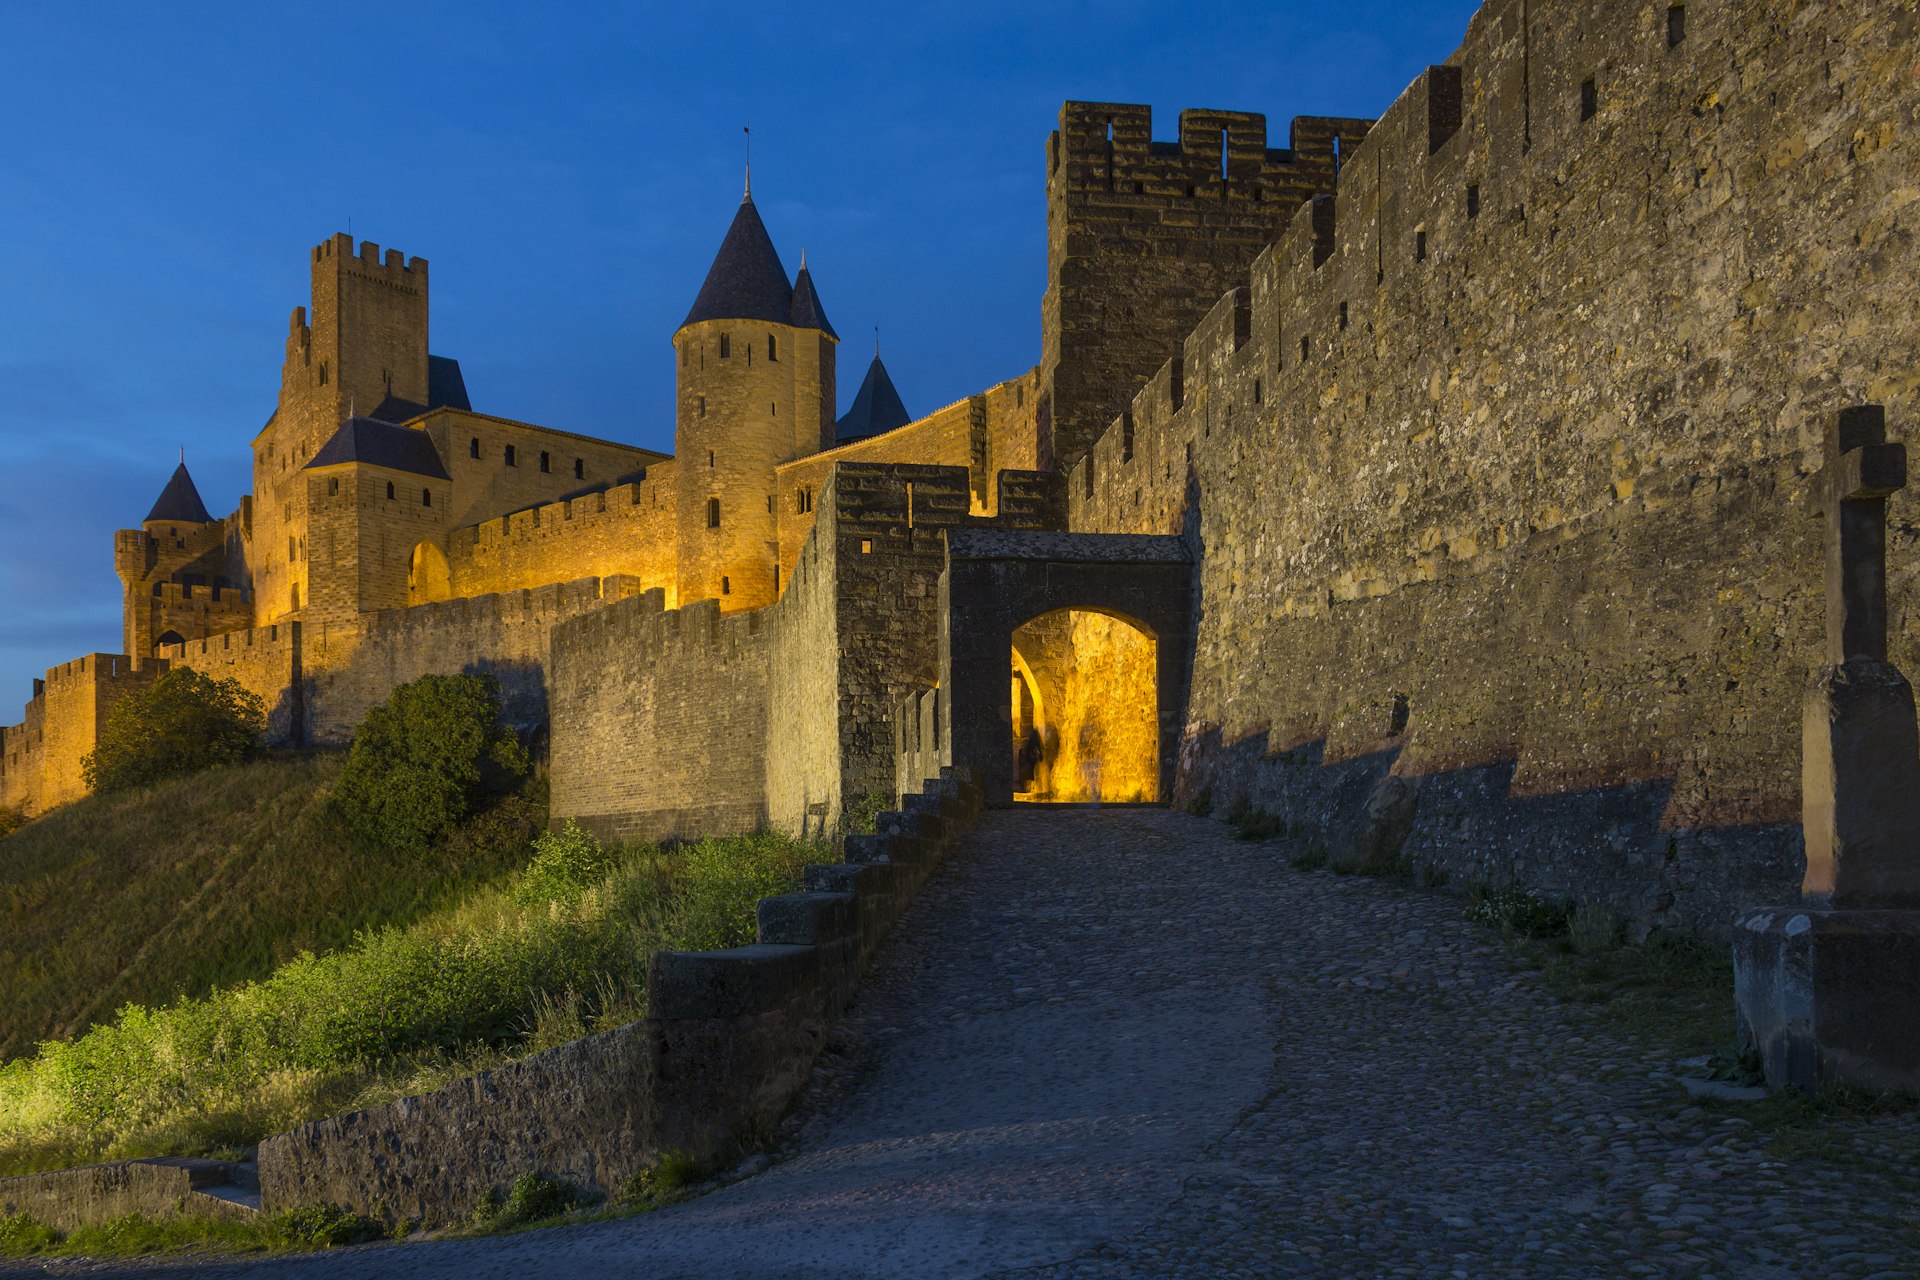 The medieval fortress and walled city of Carcassone in southwest France. Founded by the Visigoths in the 5th century, it was restored in 1853 and is now a UNESCO World Heritage Site.